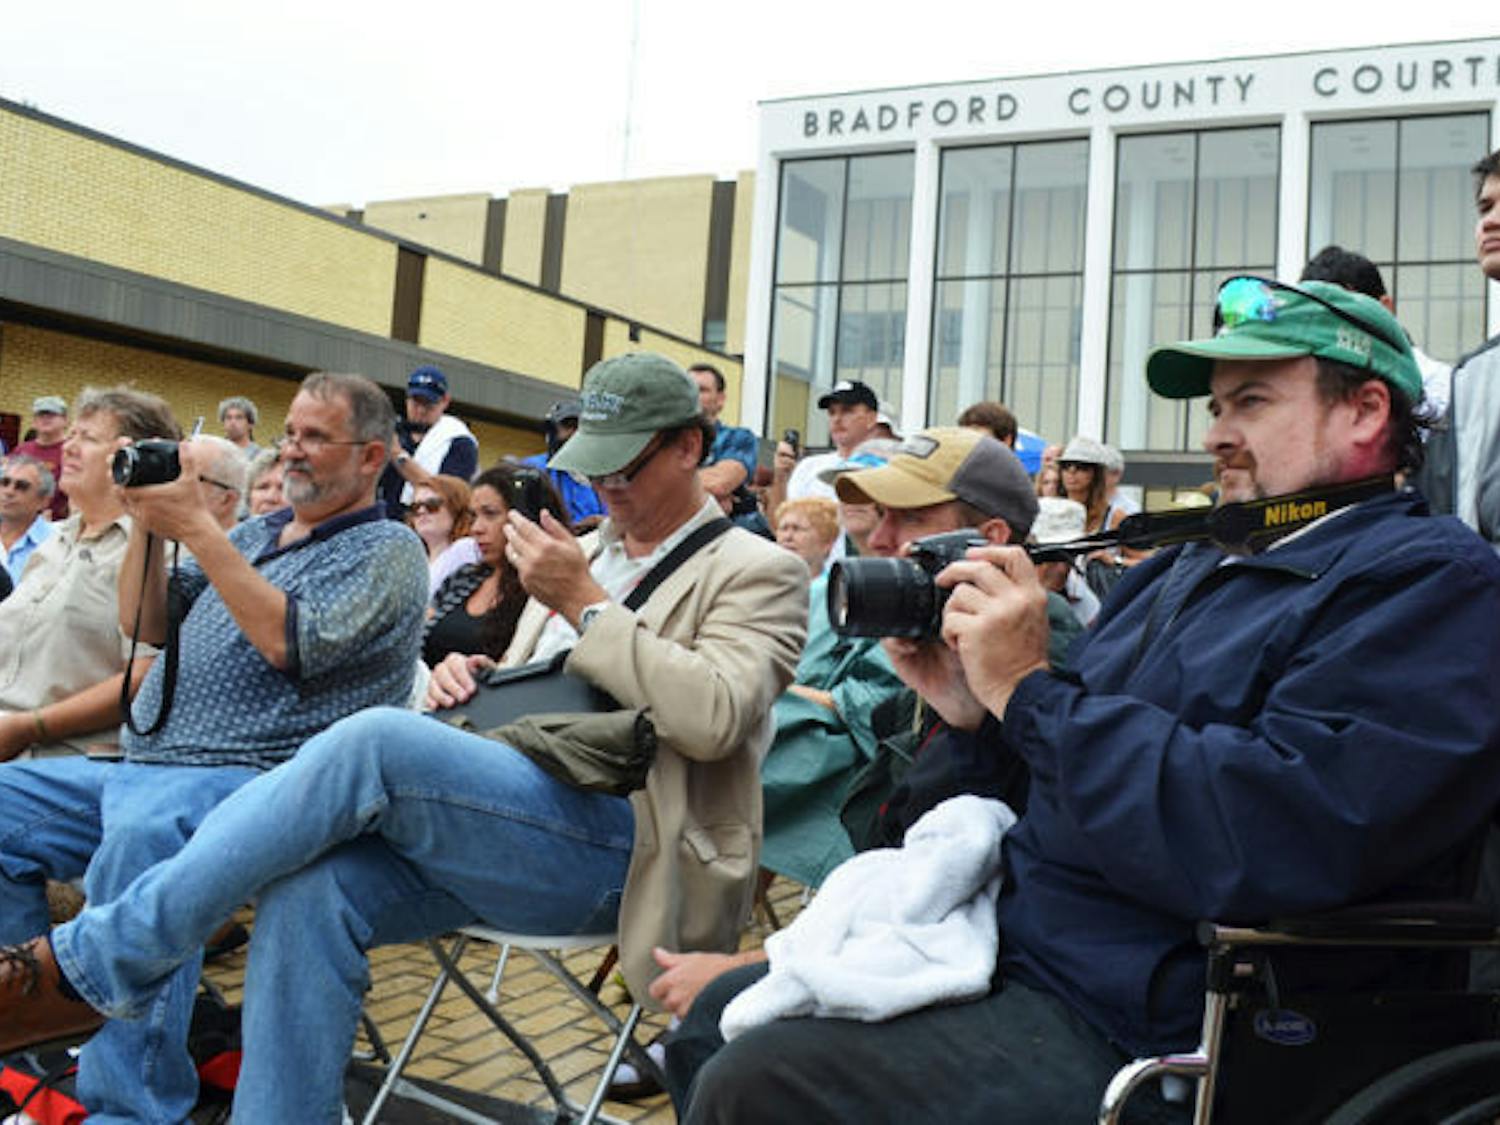 Crowds listen to speakers in front of the Bradford County Courthouse on Saturday, June 29, for the unveiling of an atheist monument near a monument of the Ten Commandments in Starke, Fla.